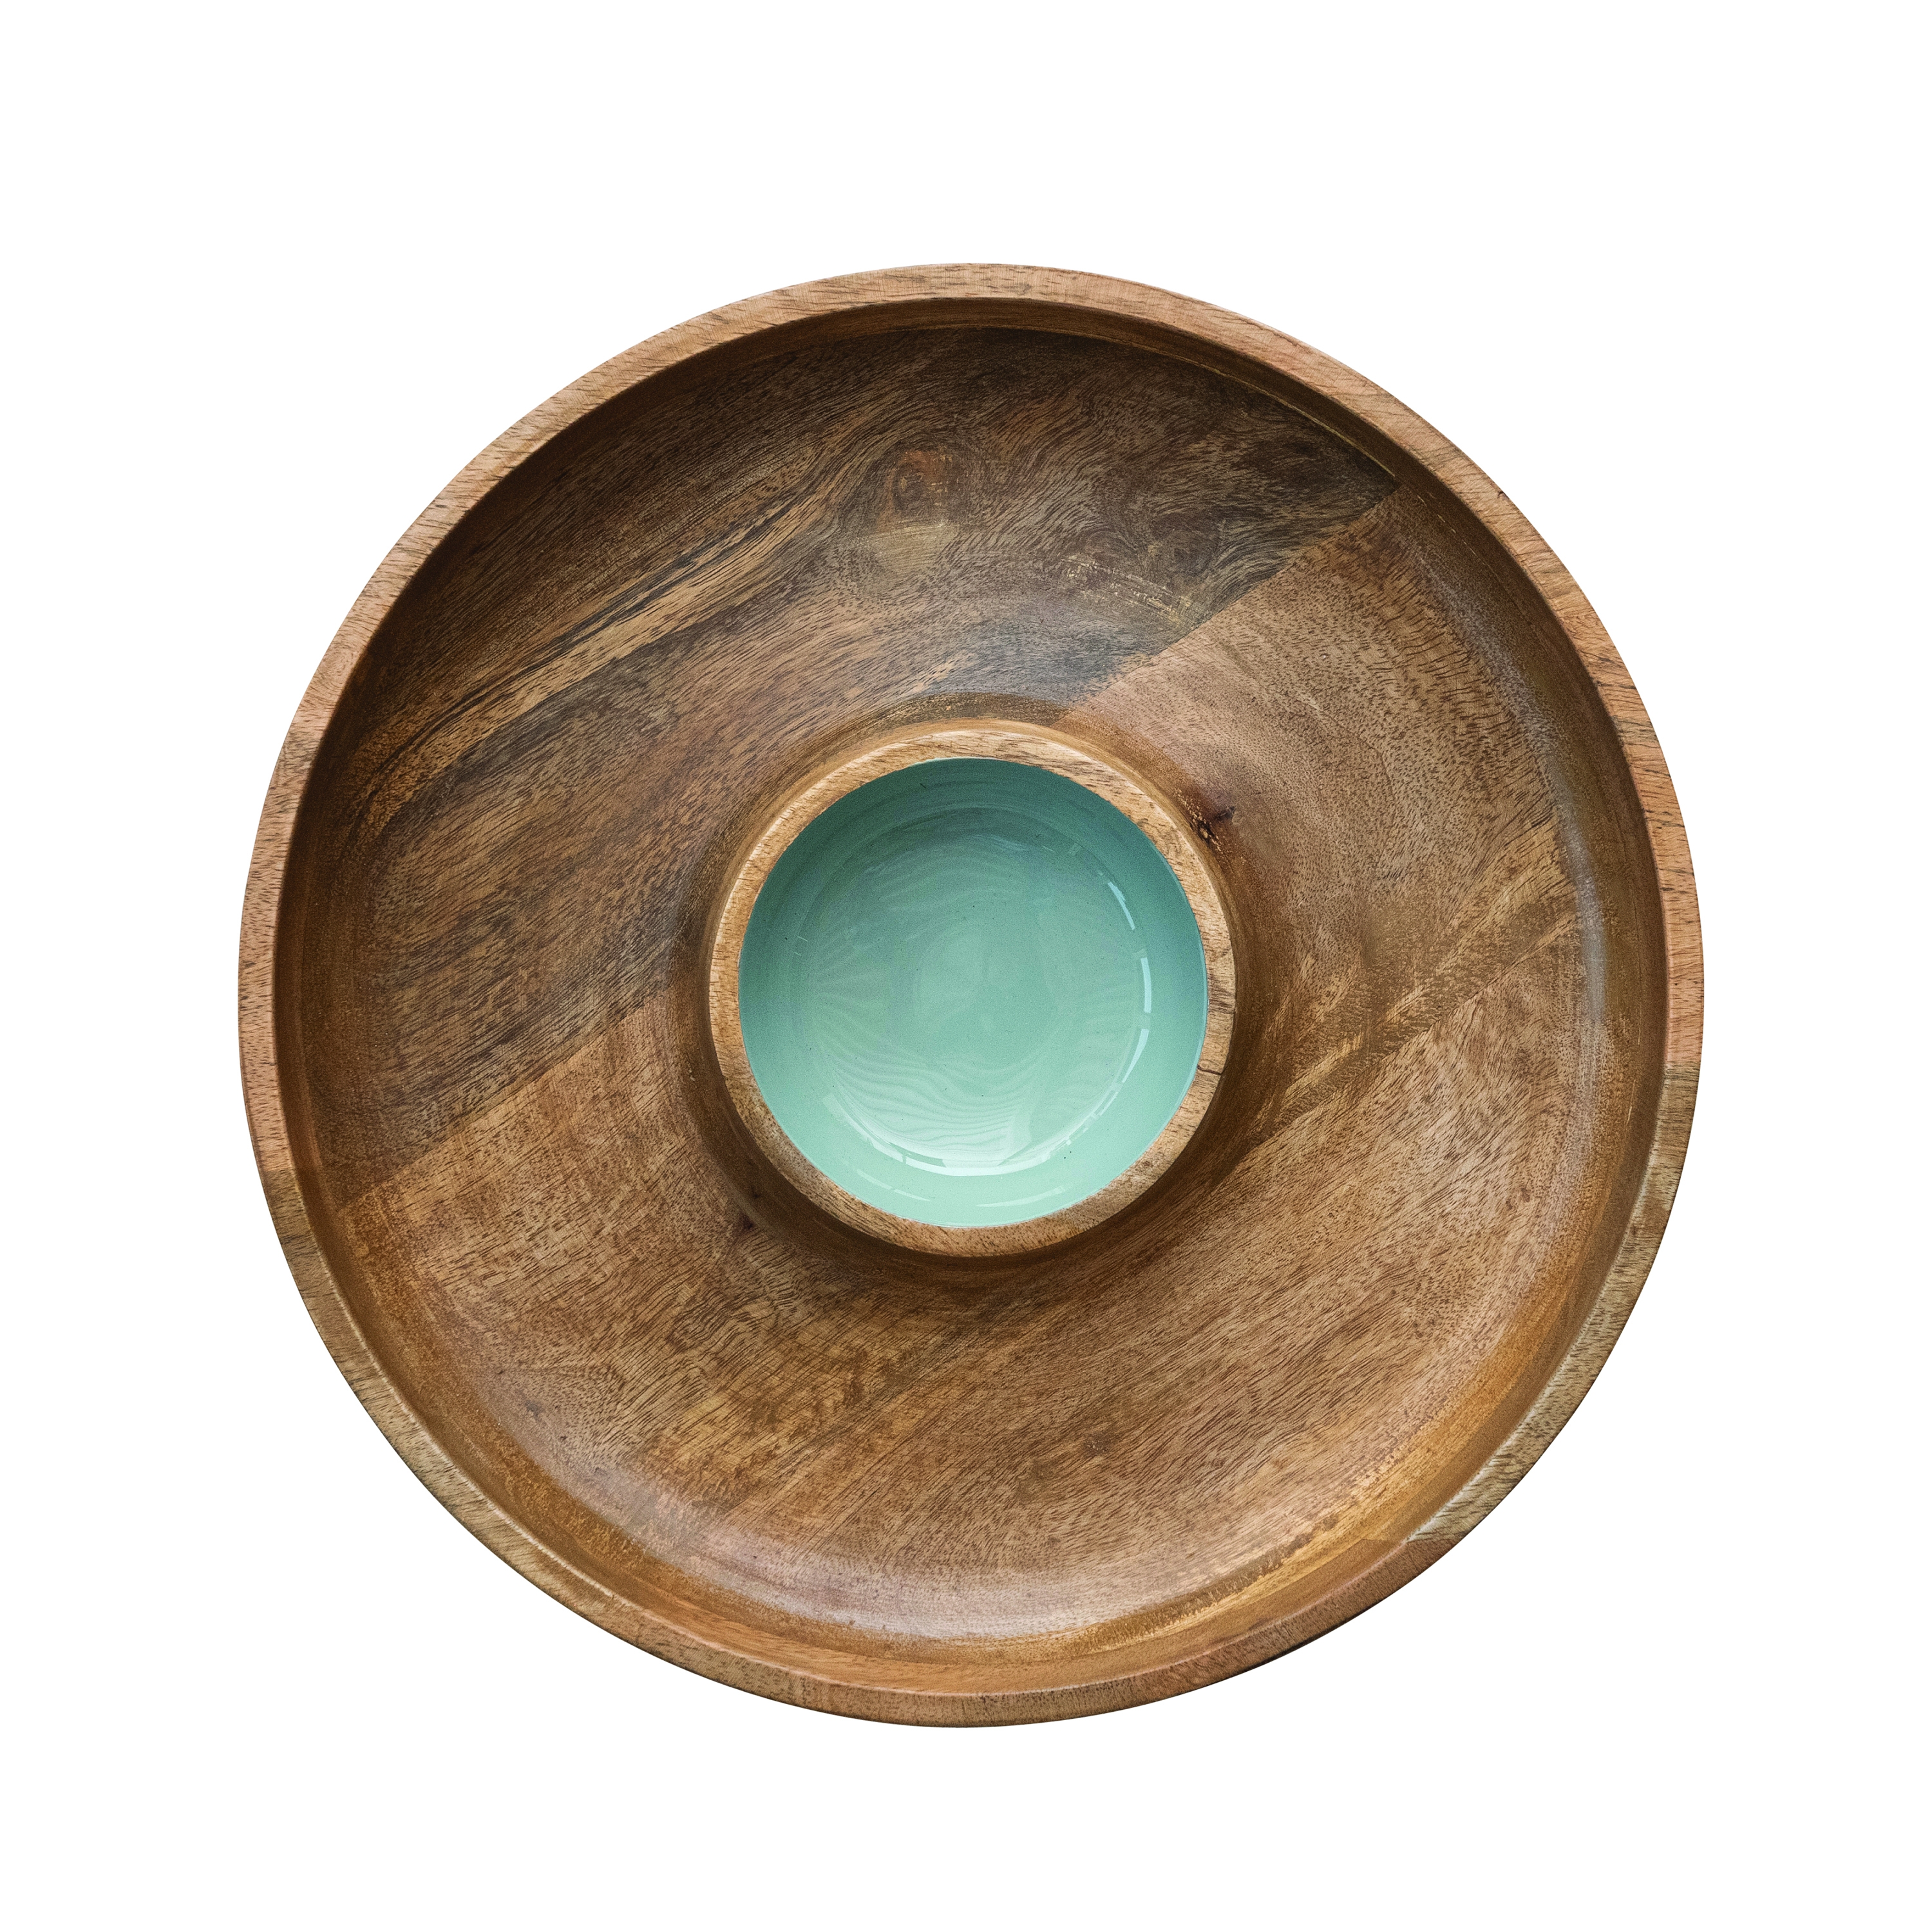 13.75 Inches Round Mango Wood Lazy Susan Server with 2 Sections and Enameled Center, Natural and Blue - Image 0